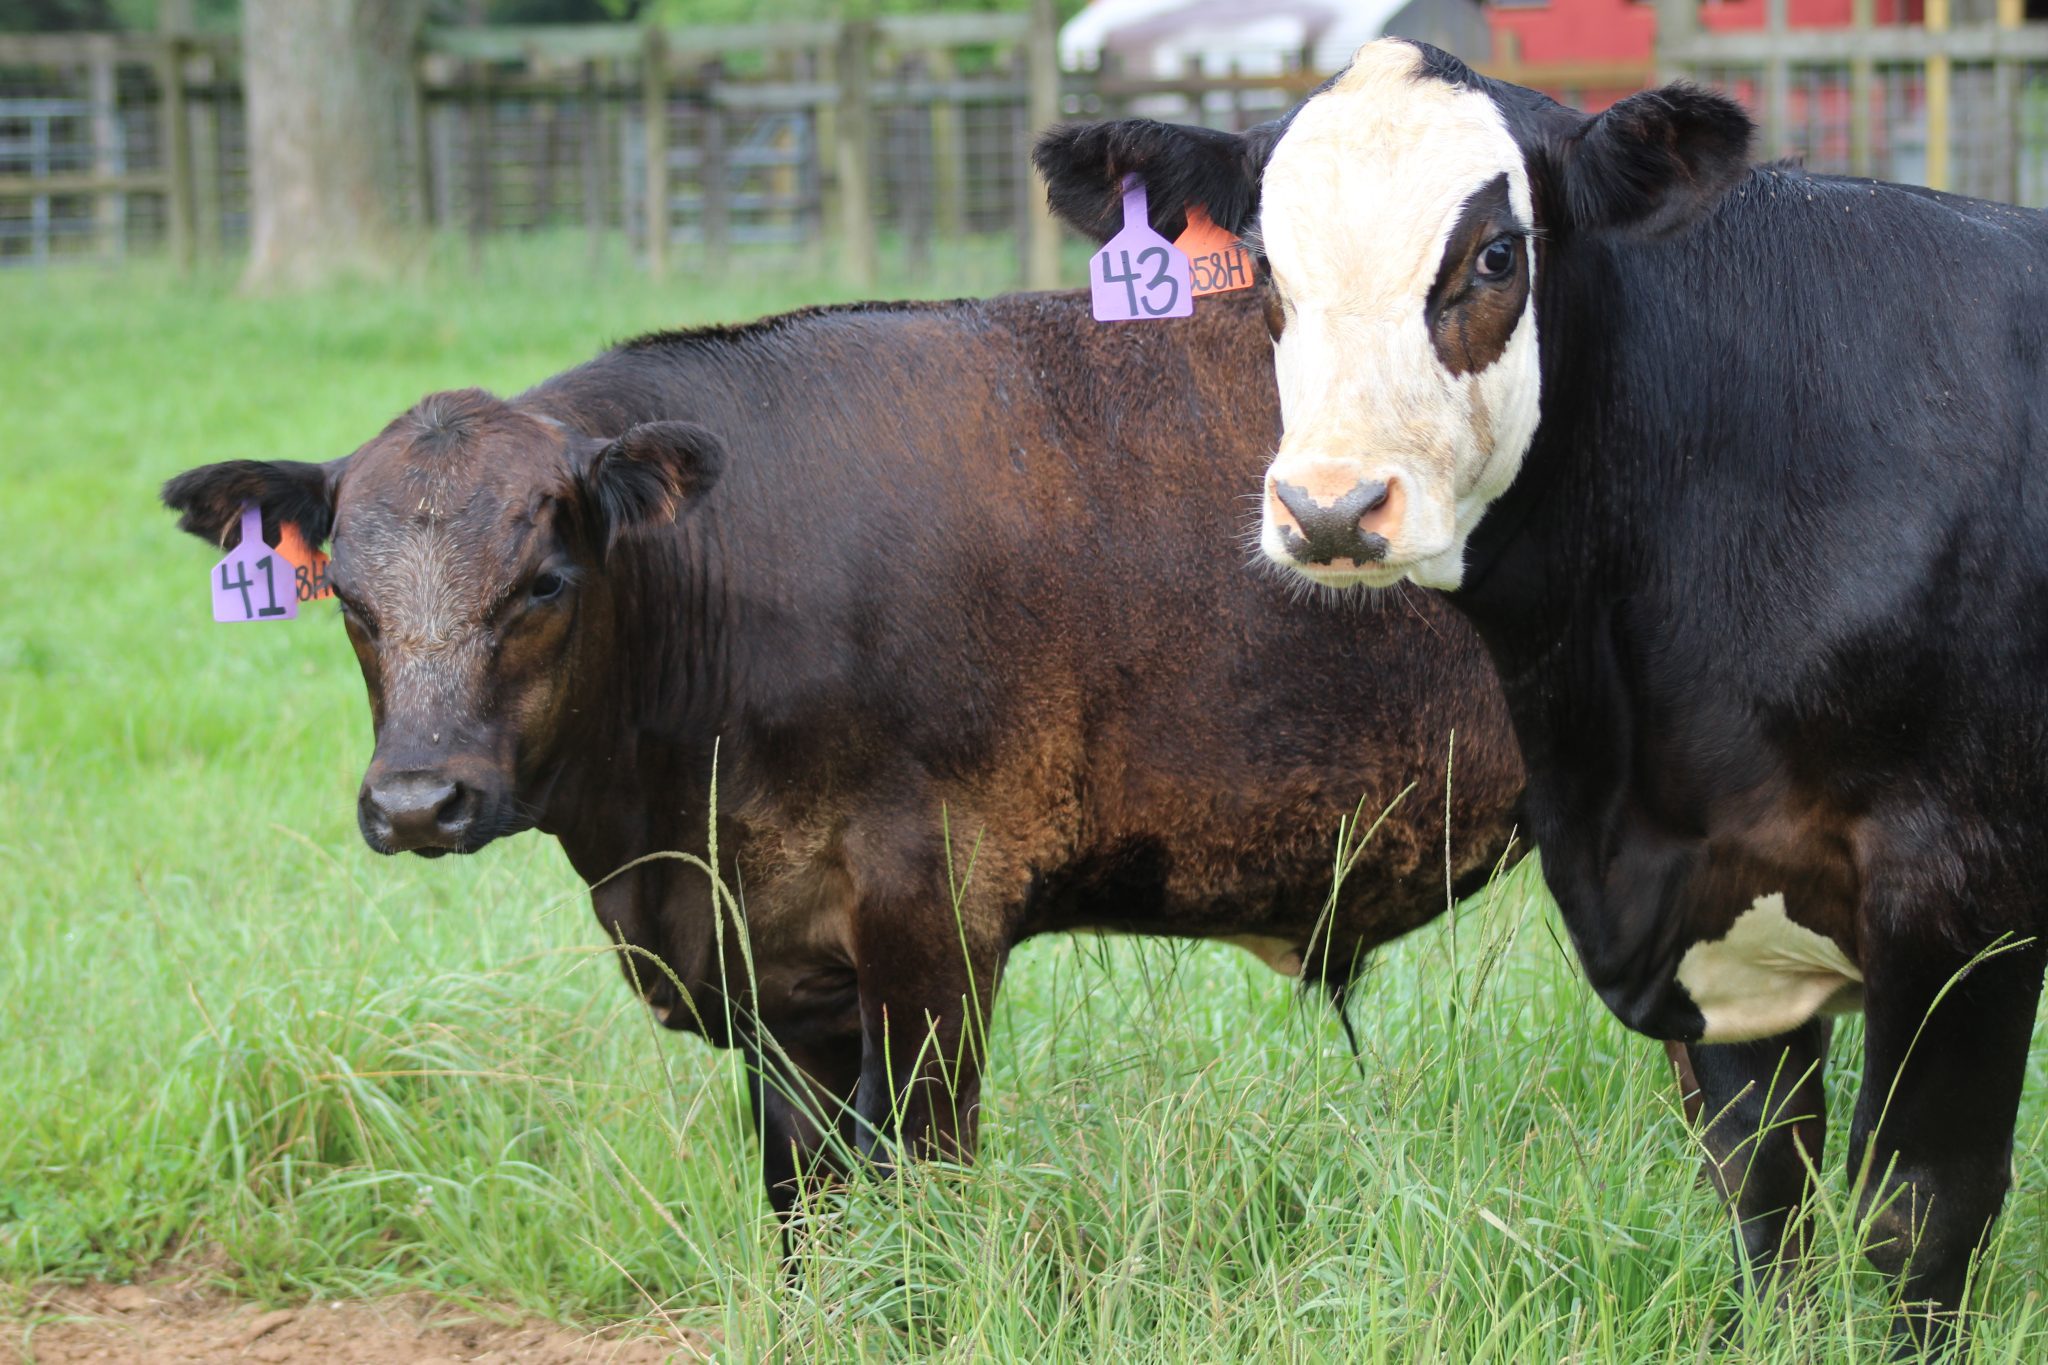 A young, black bull calf and a young, black baldy heifer